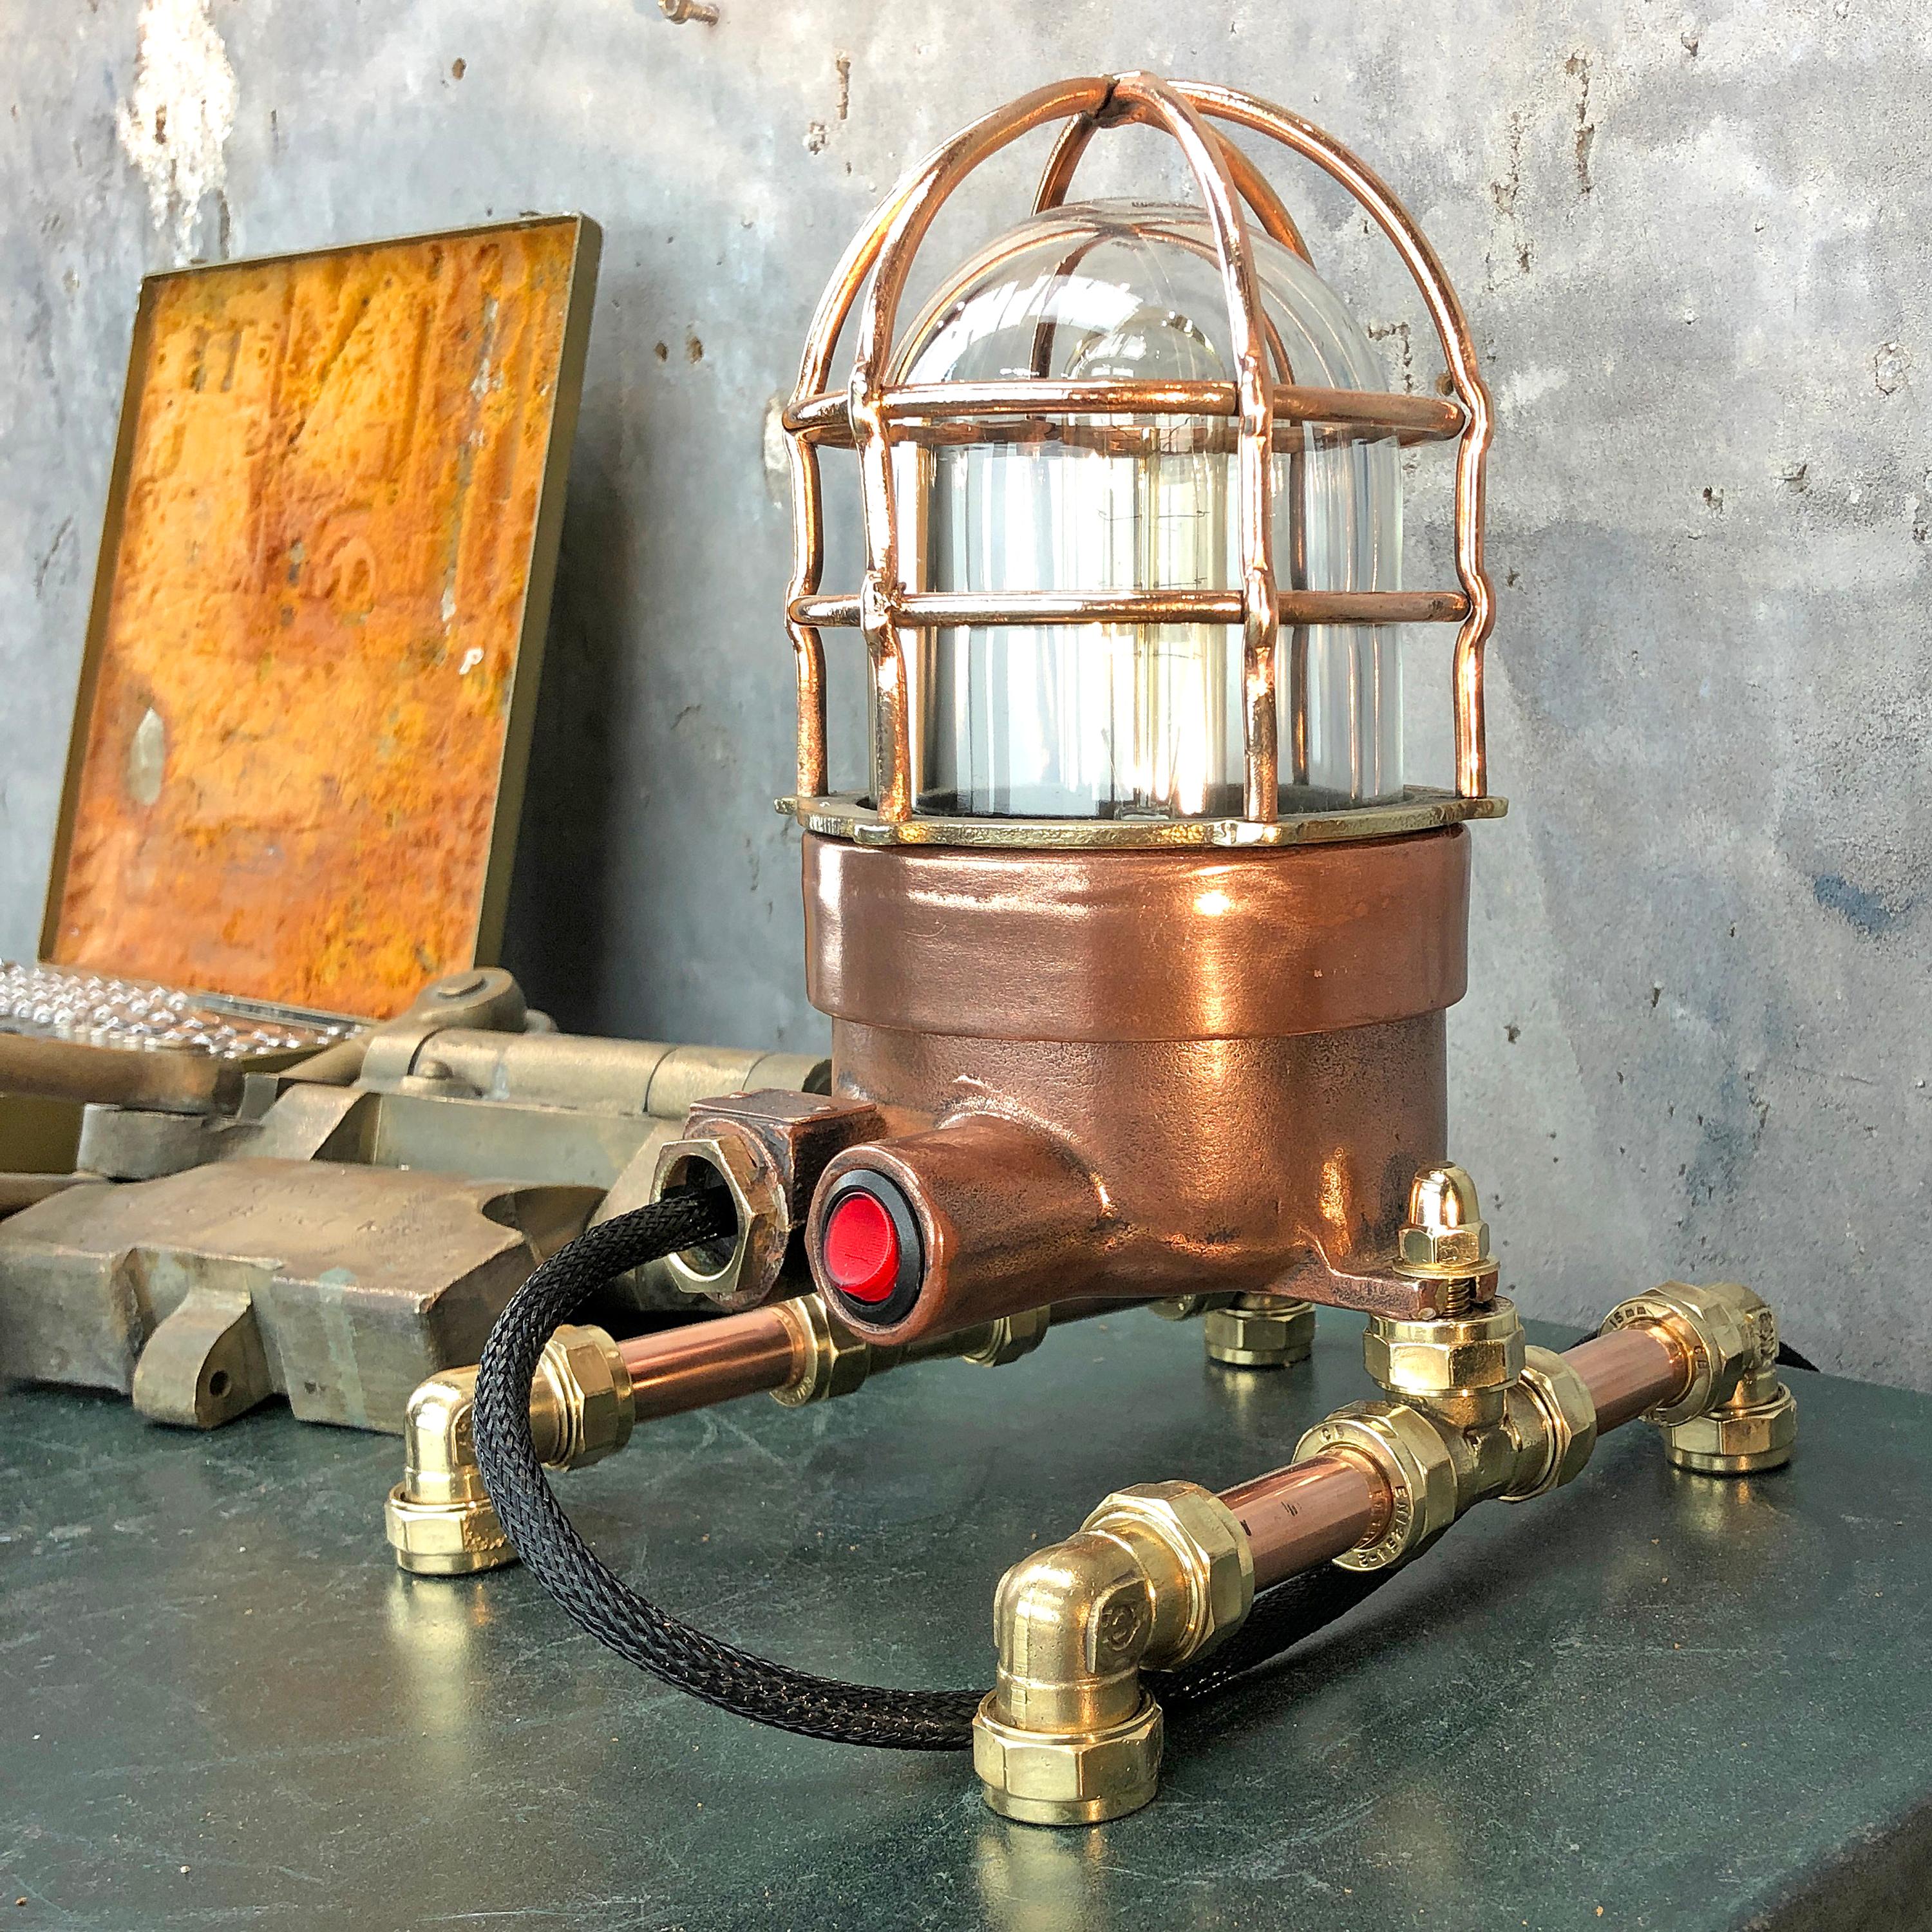 1970s explosion proof passage way light reclaimed from a super tanker modified to function as a table or desk lamp.

The light itself is made from copper and brass and has a tempered glass dome and protective cage.

These lights were